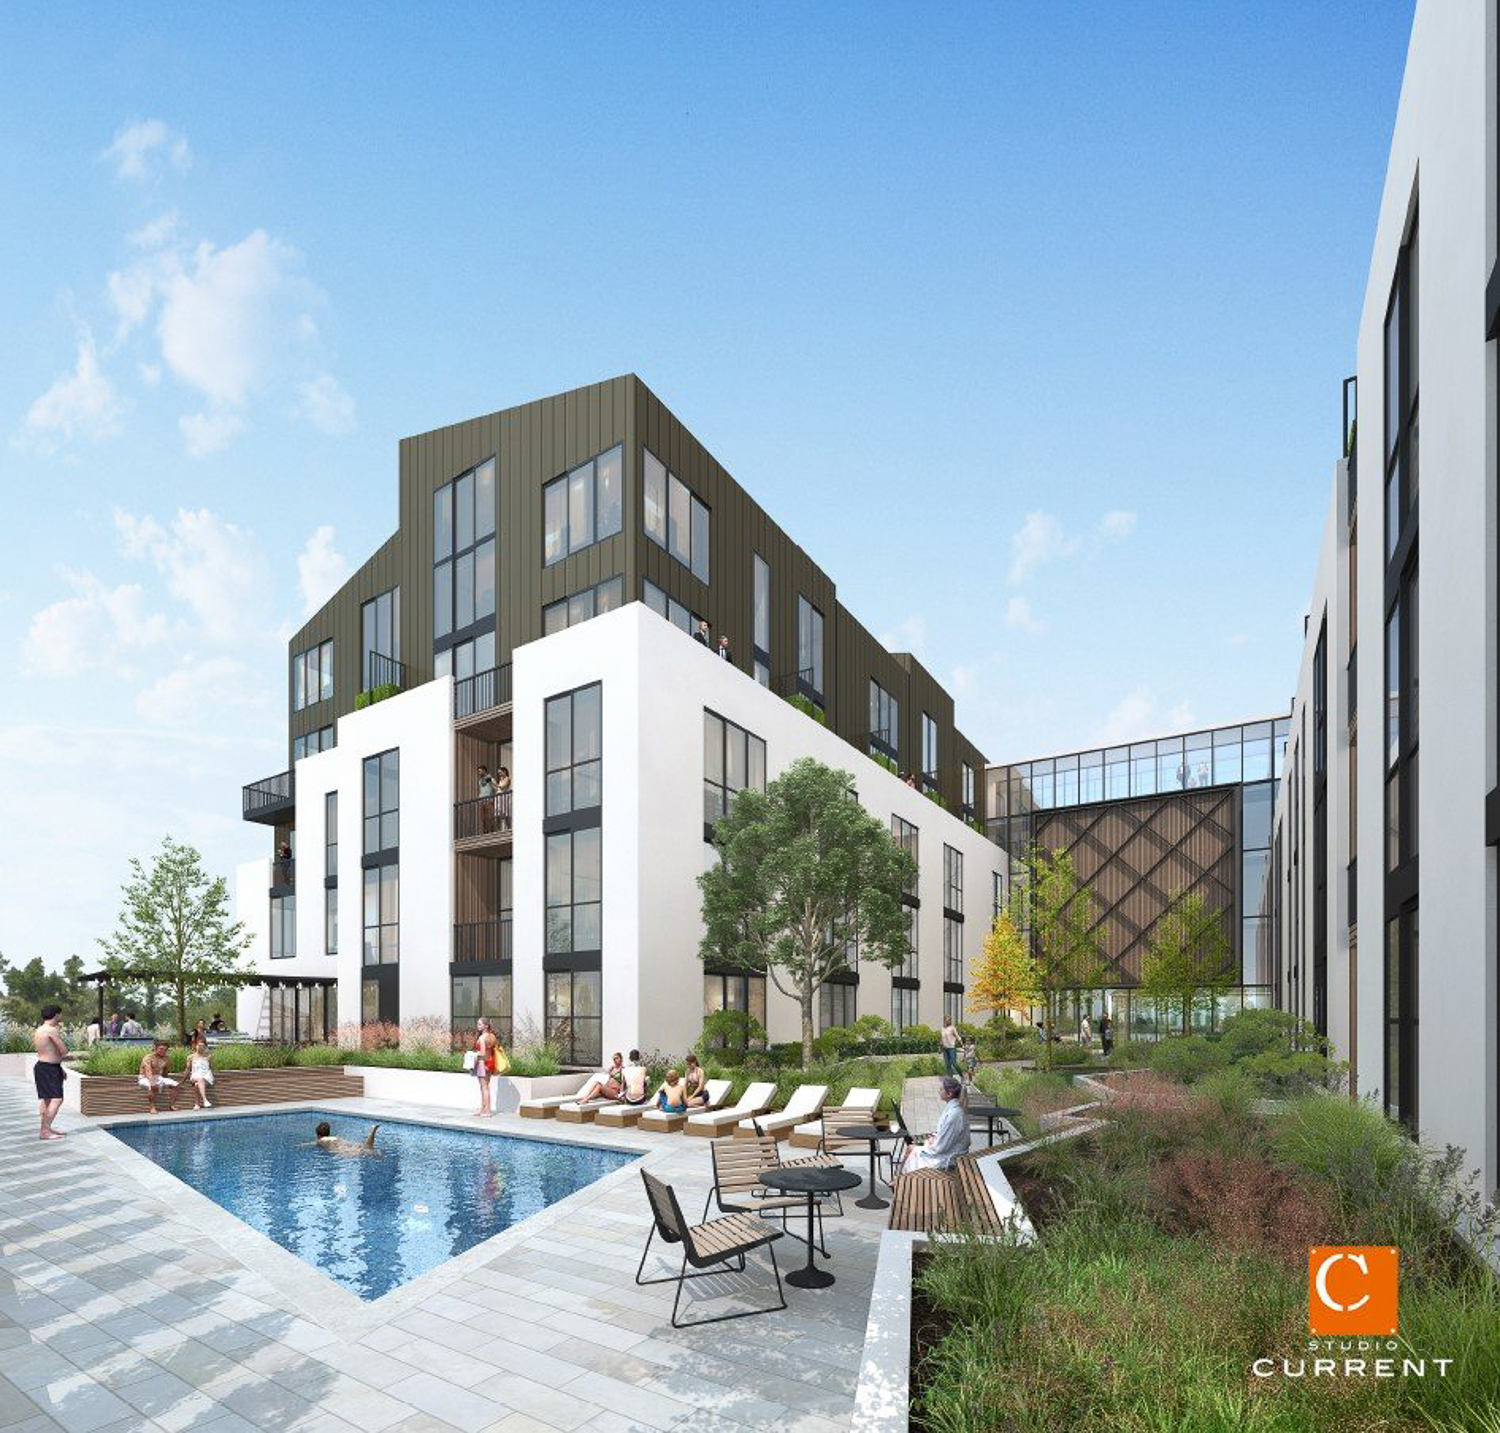 940 Willow Street amenity courtyard, rendering by Studio Current